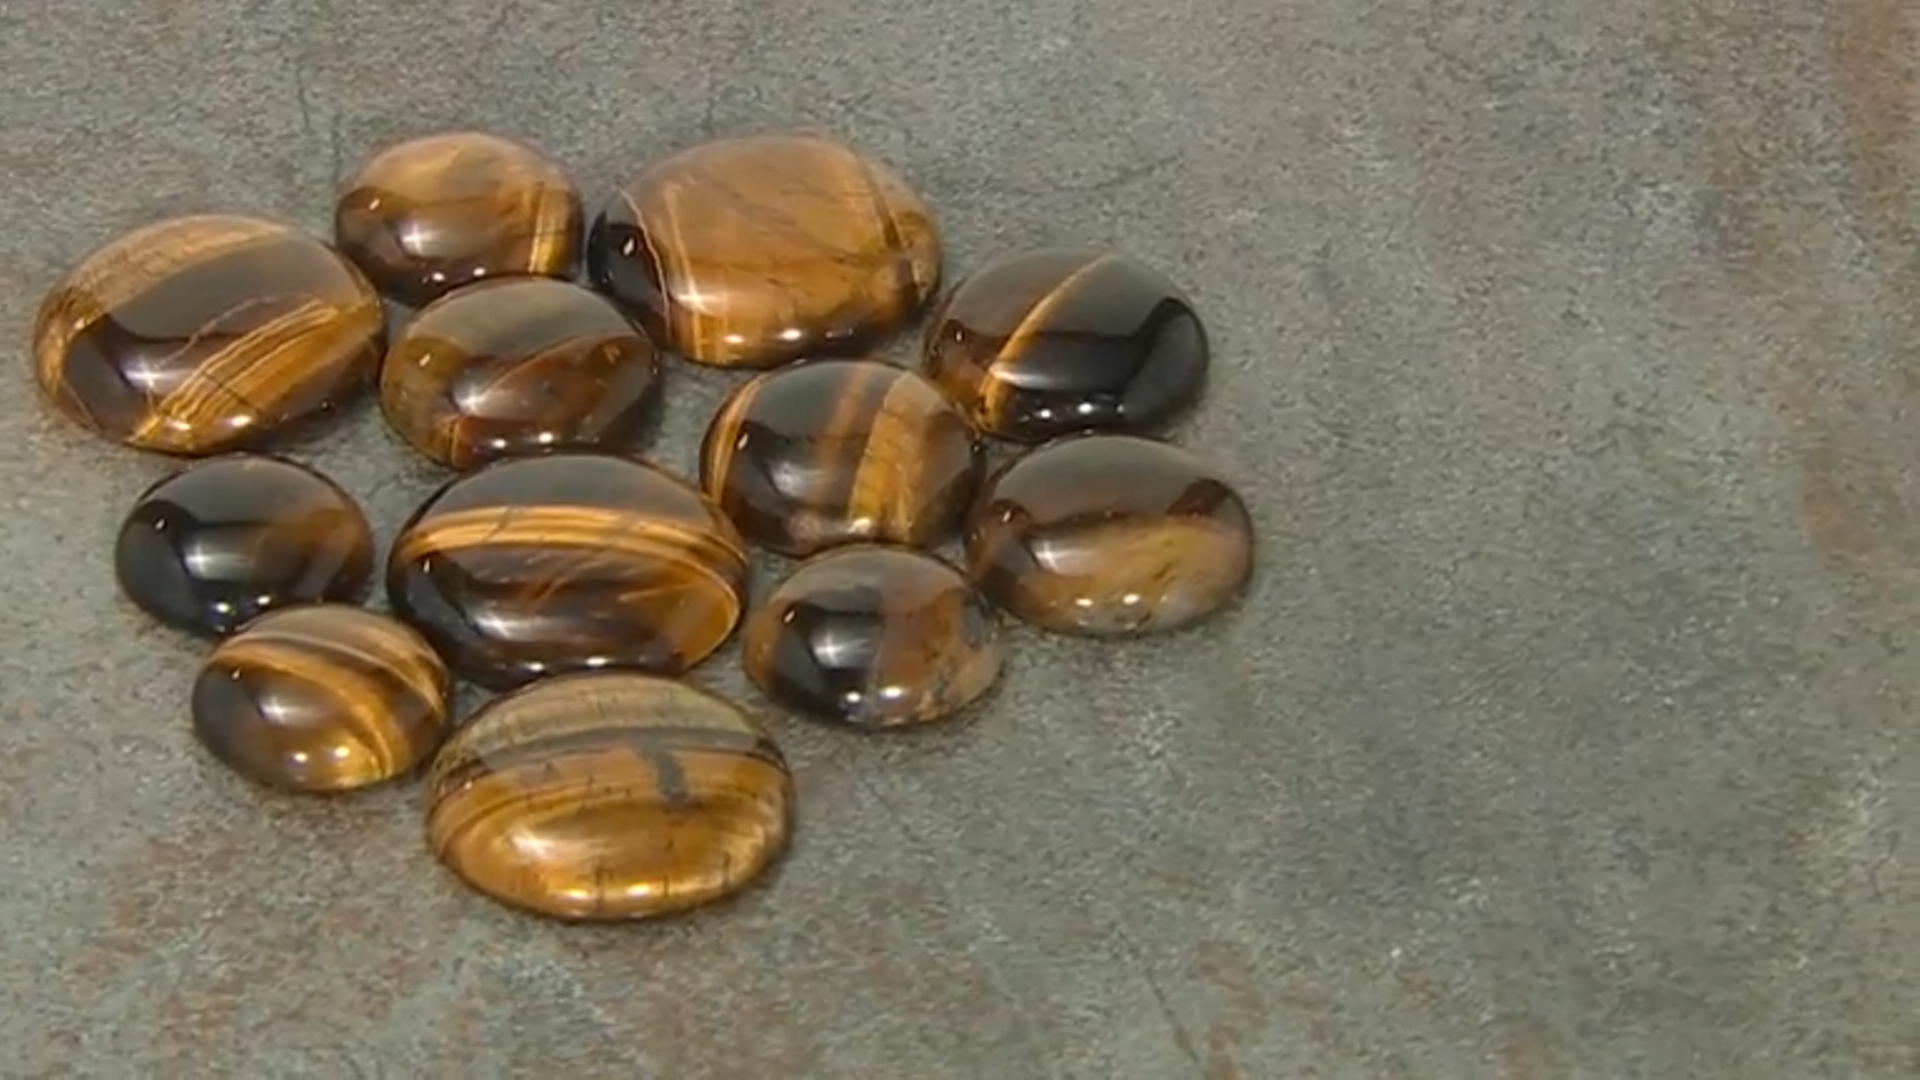 Tigers Eye Undrilled Cabochon Round appx 18-25mm in 3 Sizes 12 Pieces Total Video Thumbnail